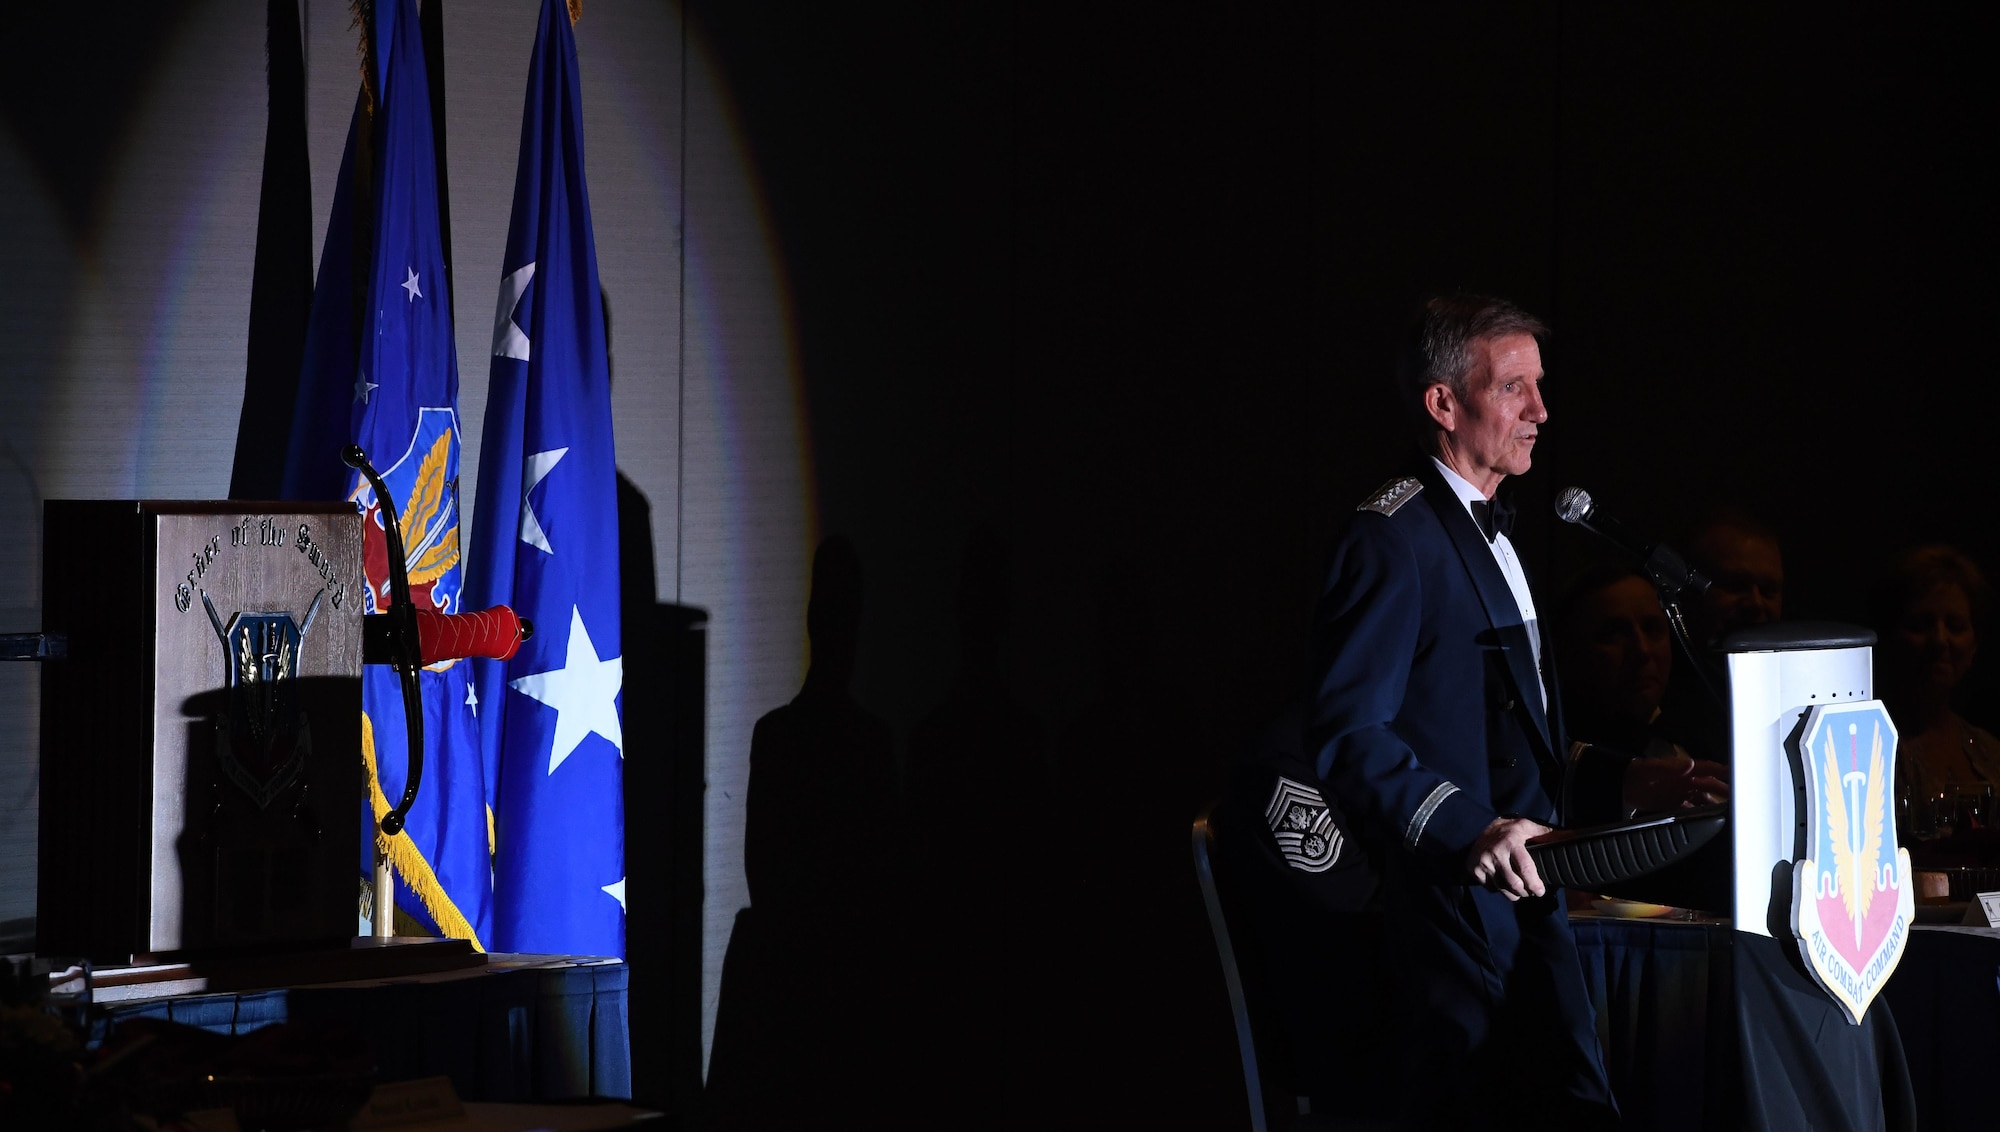 Gen. Hawk Carlisle, commander of Air Combat Command, gives an acceptance speech during his Order of the Sword presentation ceremony at the Hampton Roads Convention Center in Hampton, Va., Oct. 27, 2016. Carlisle, who has commanded ACC since October 2014, is the eighth ACC leader to be inducted into the command's Order of the Sword. (U.S. Air Force photo by Staff Sgt. Nick Wilson)